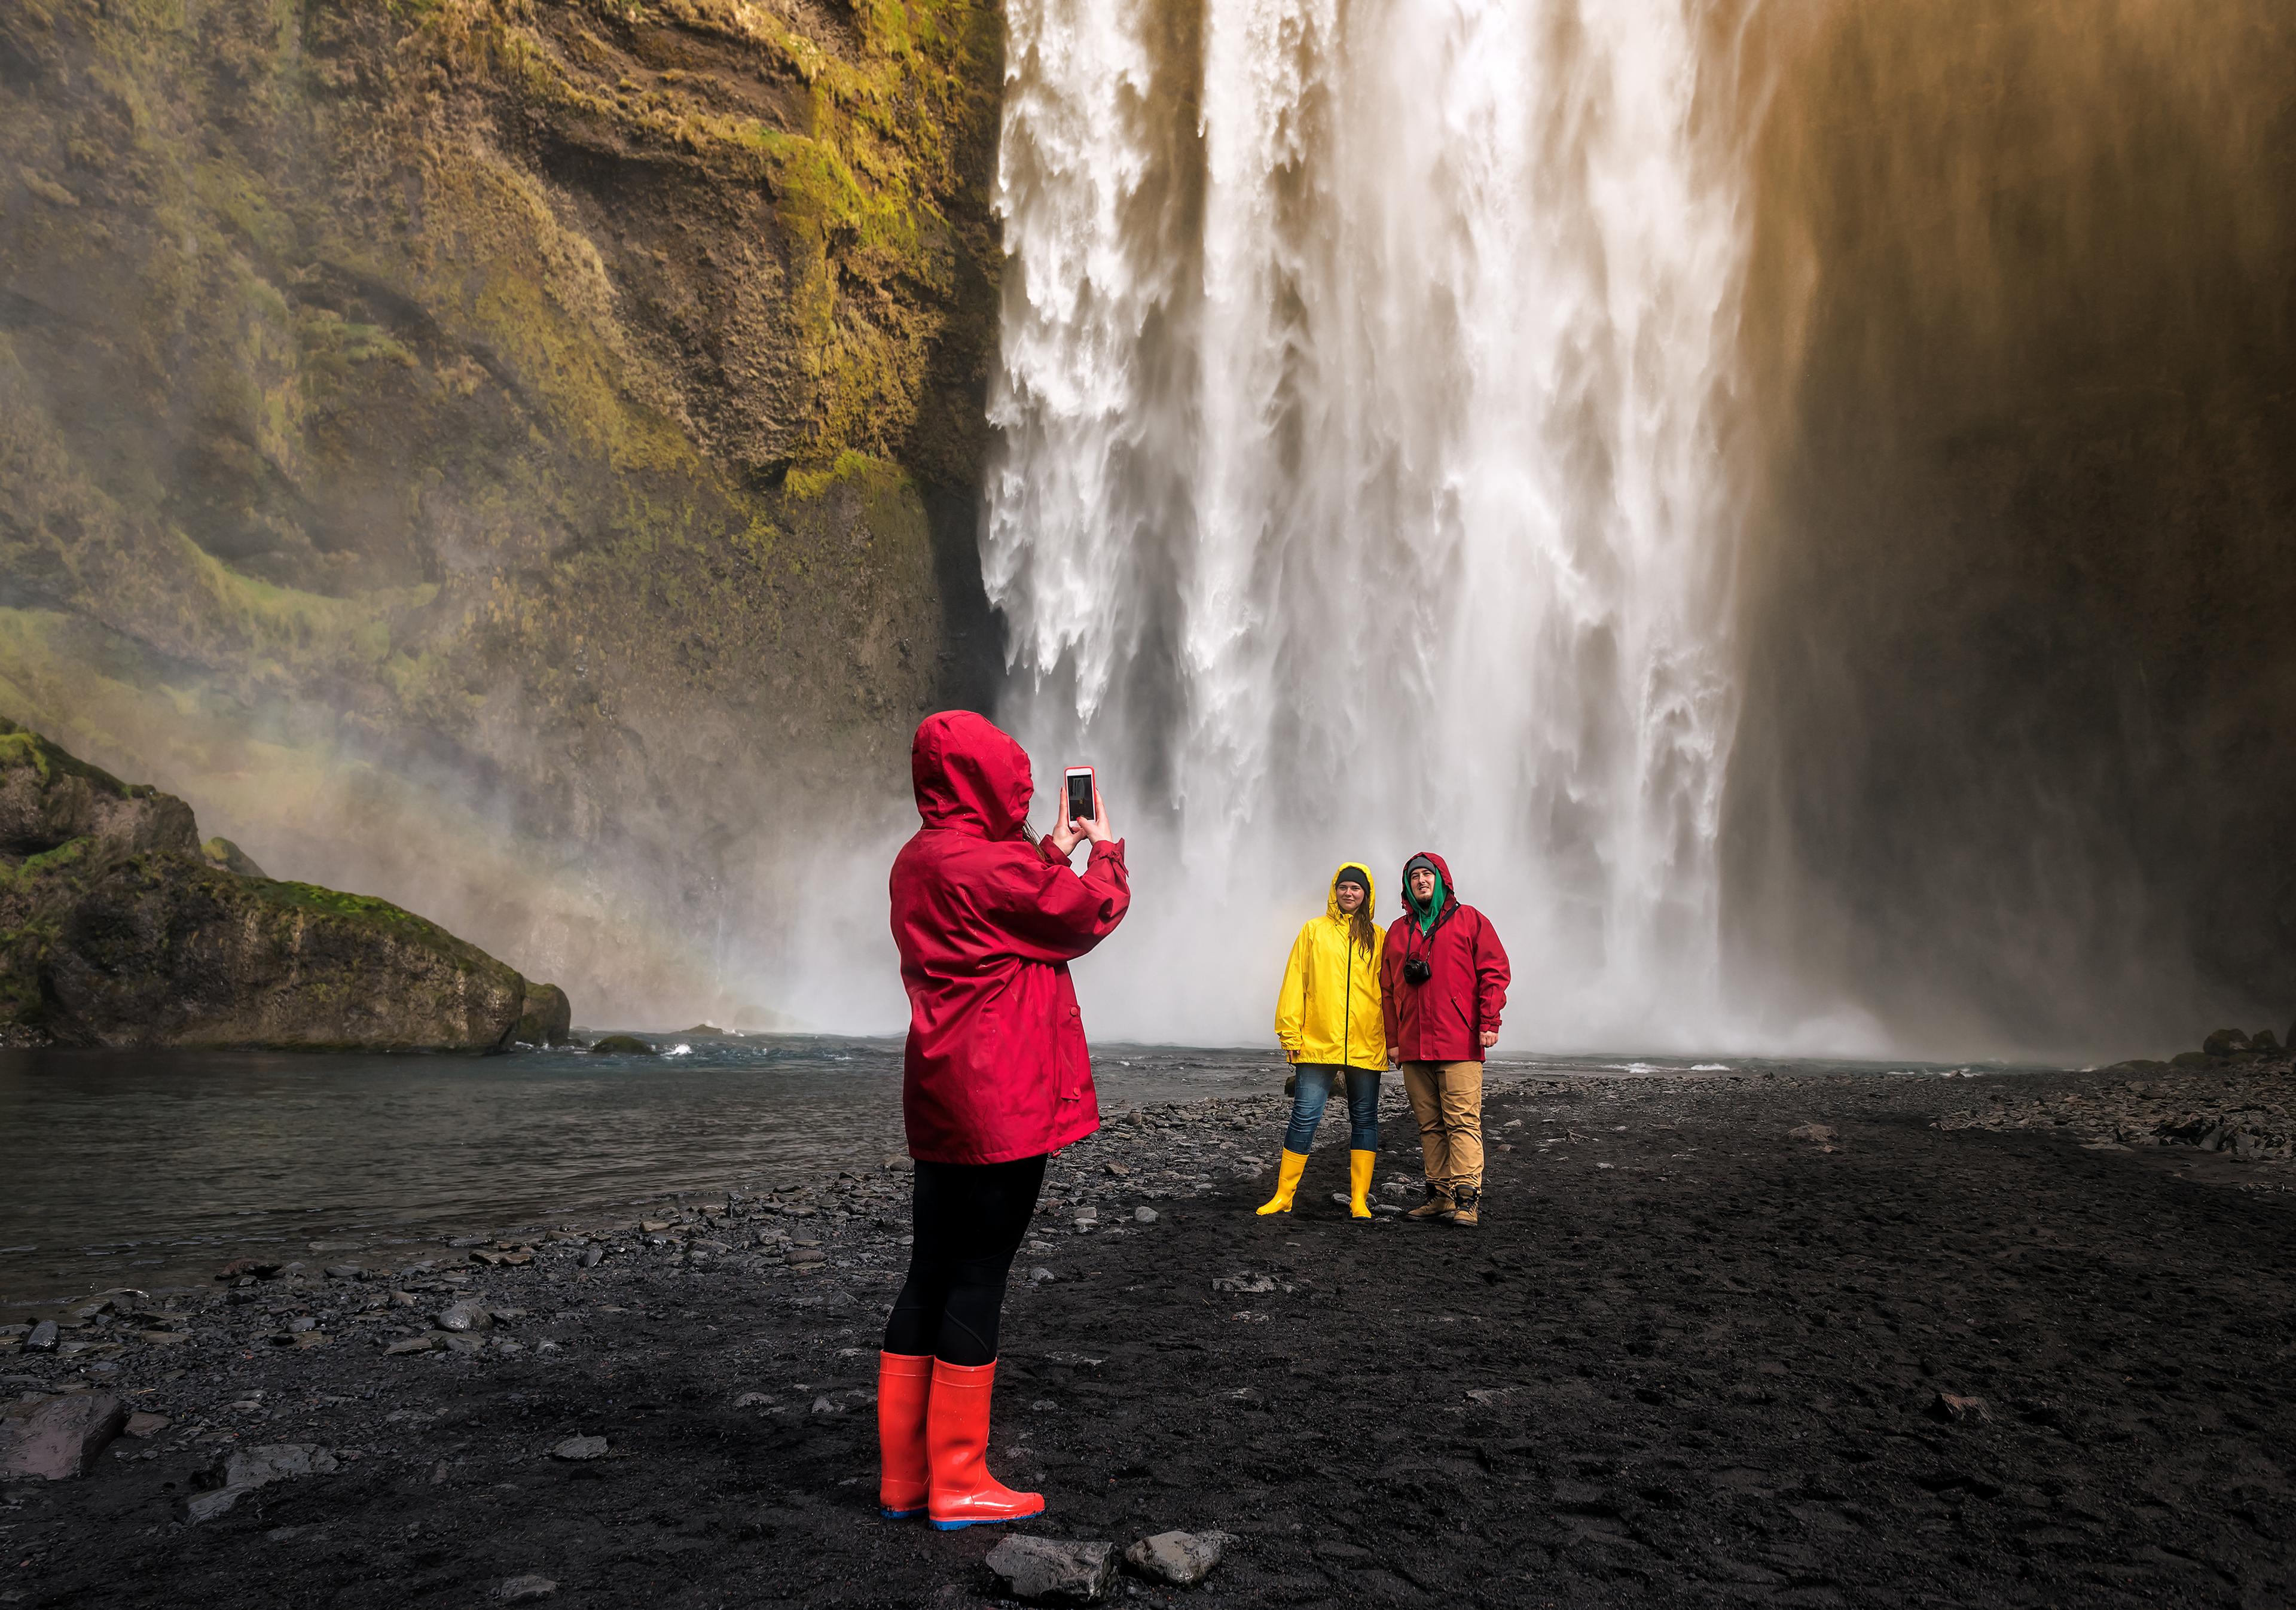 A group of tourists taking a picture in front of the Skogafoss Waterfall